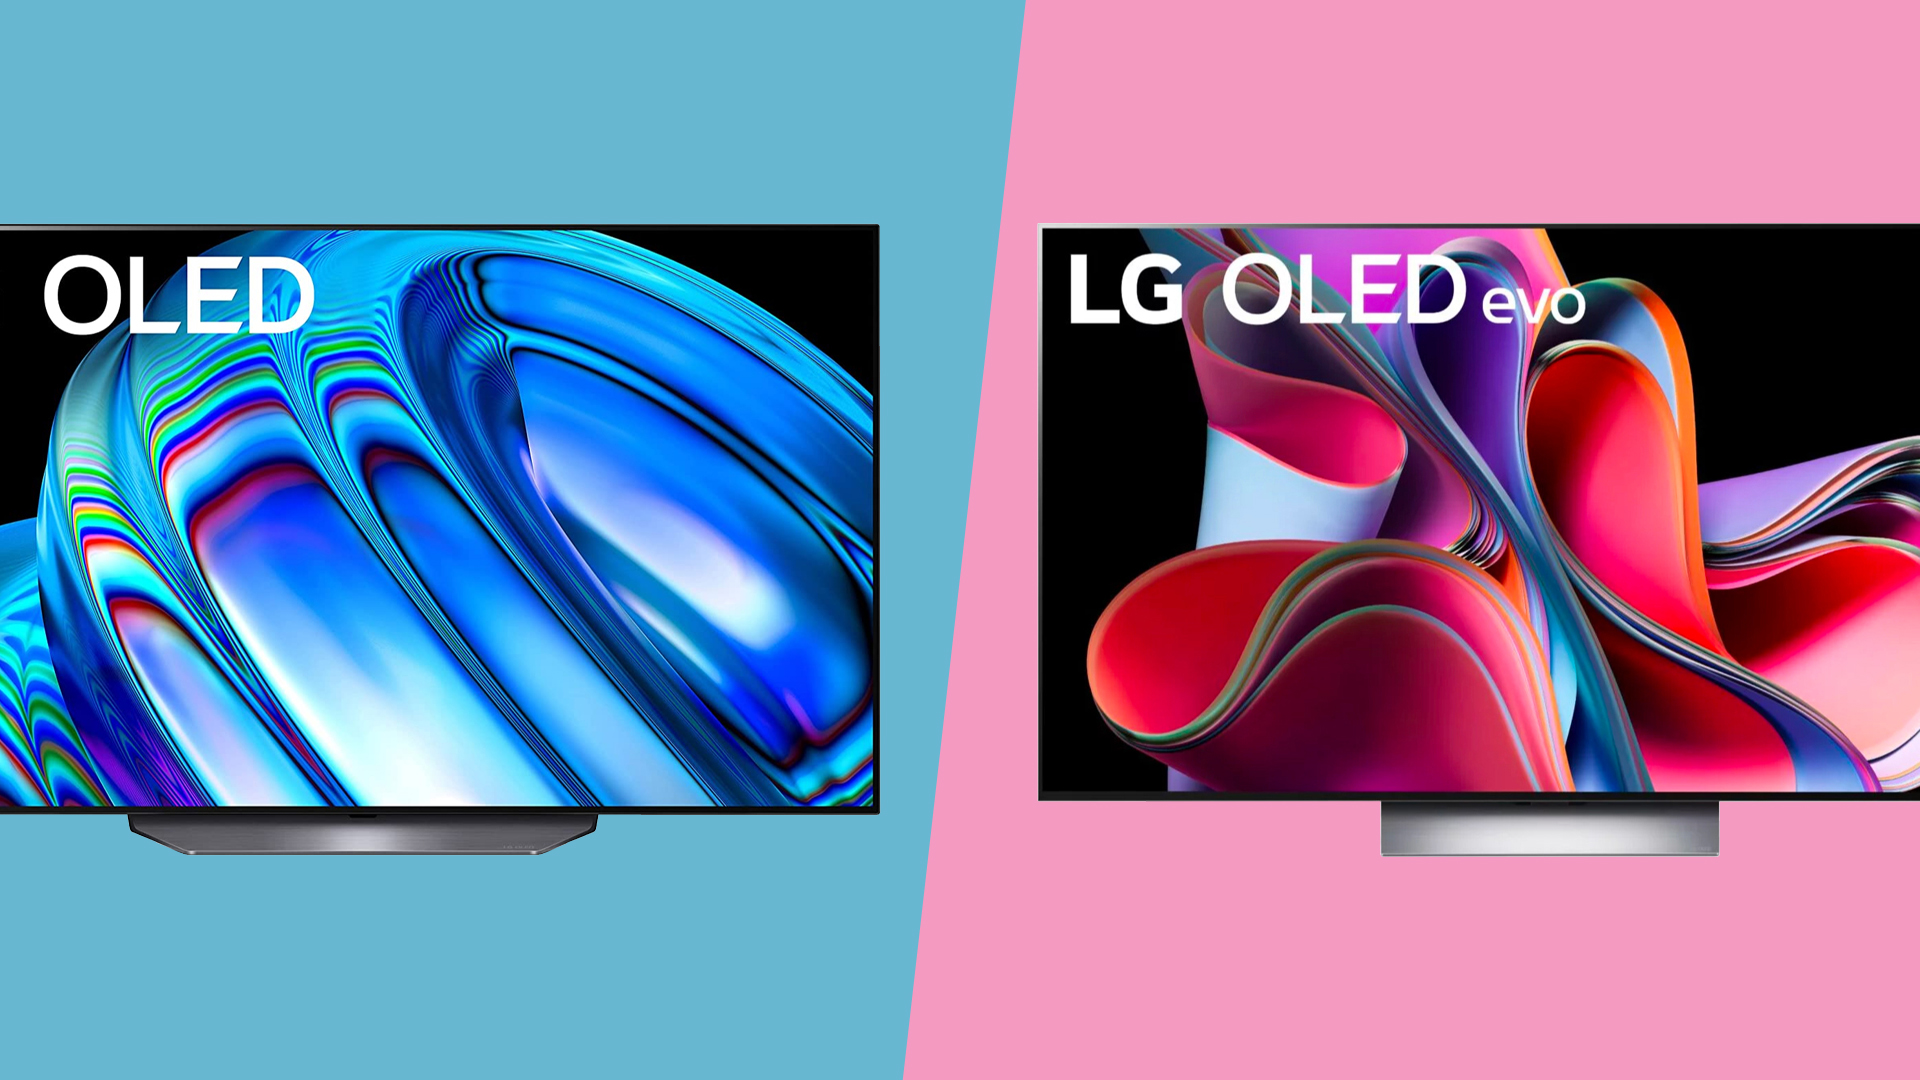 LG B3 vs LG C3: the differences between LG's OLED TVs explained